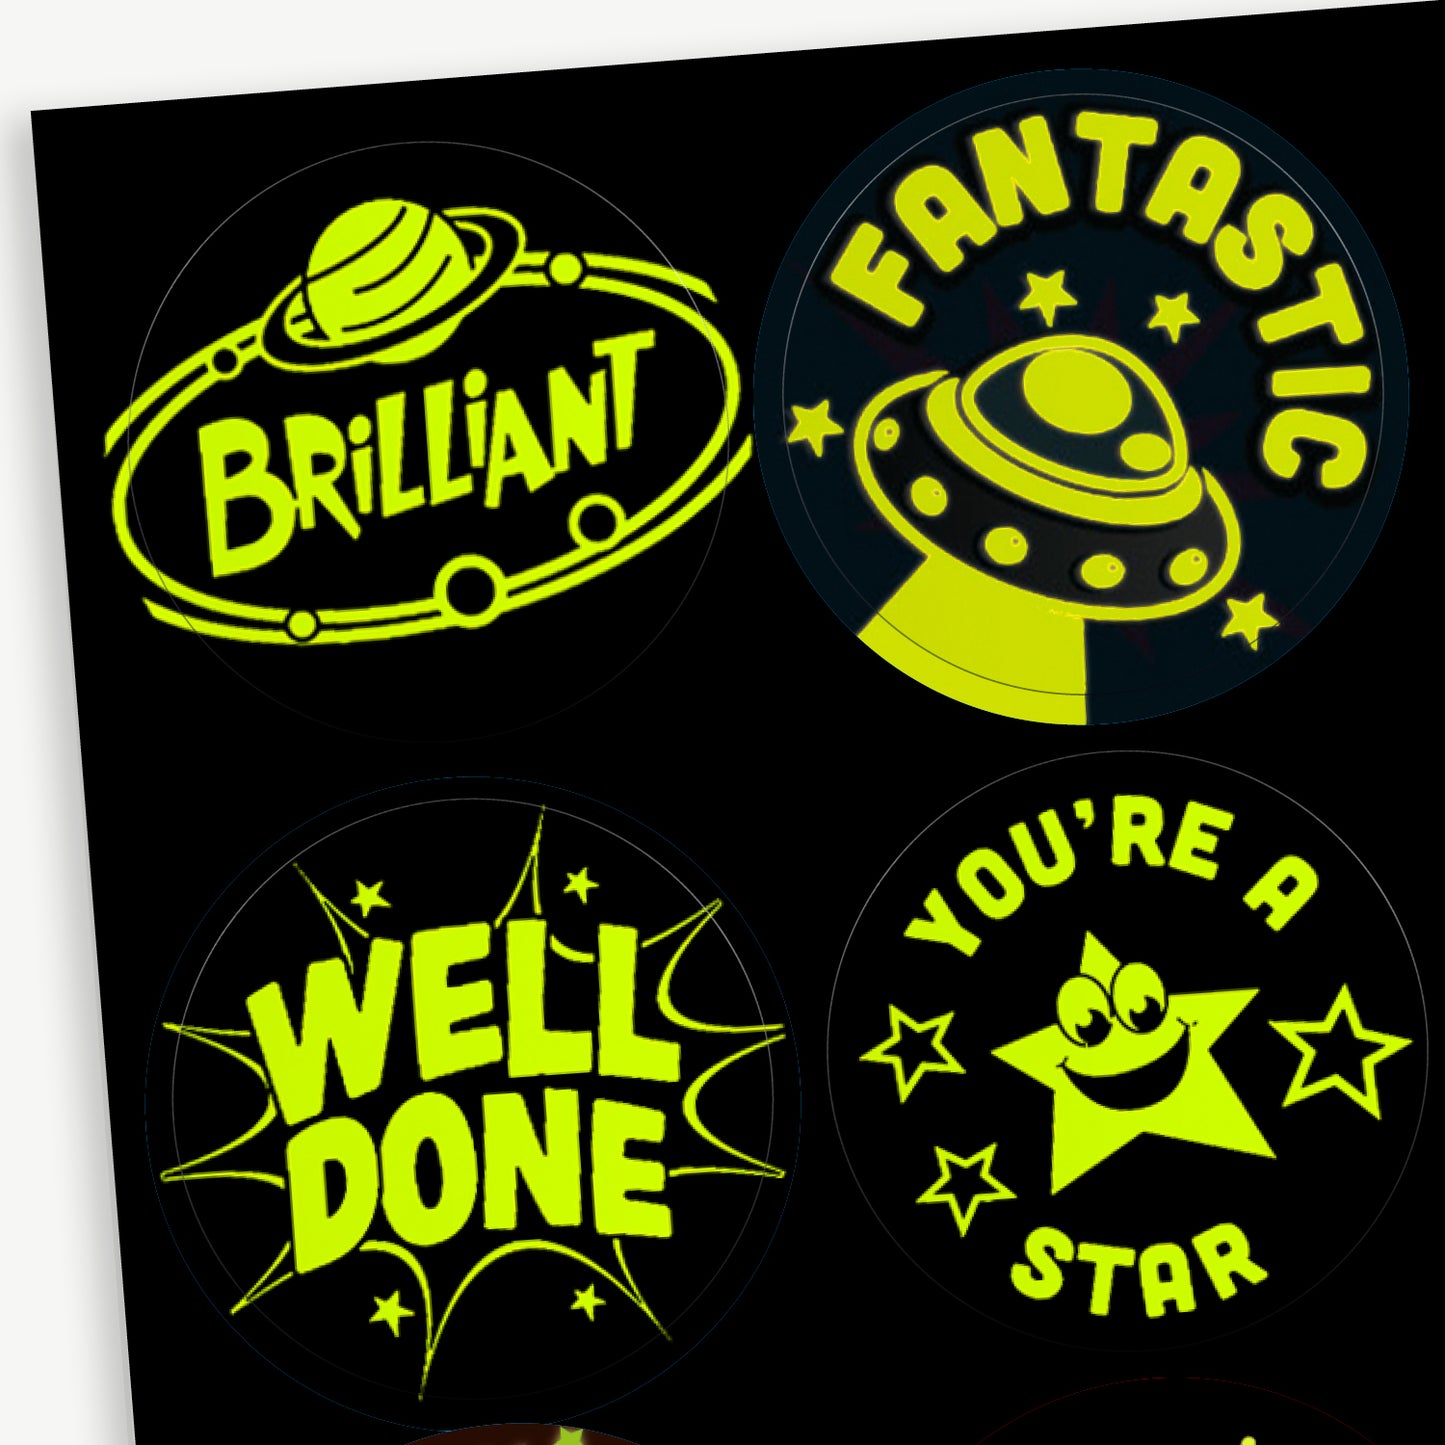 35 Glow In The Dark Space and Aliens Stickers - 37mm